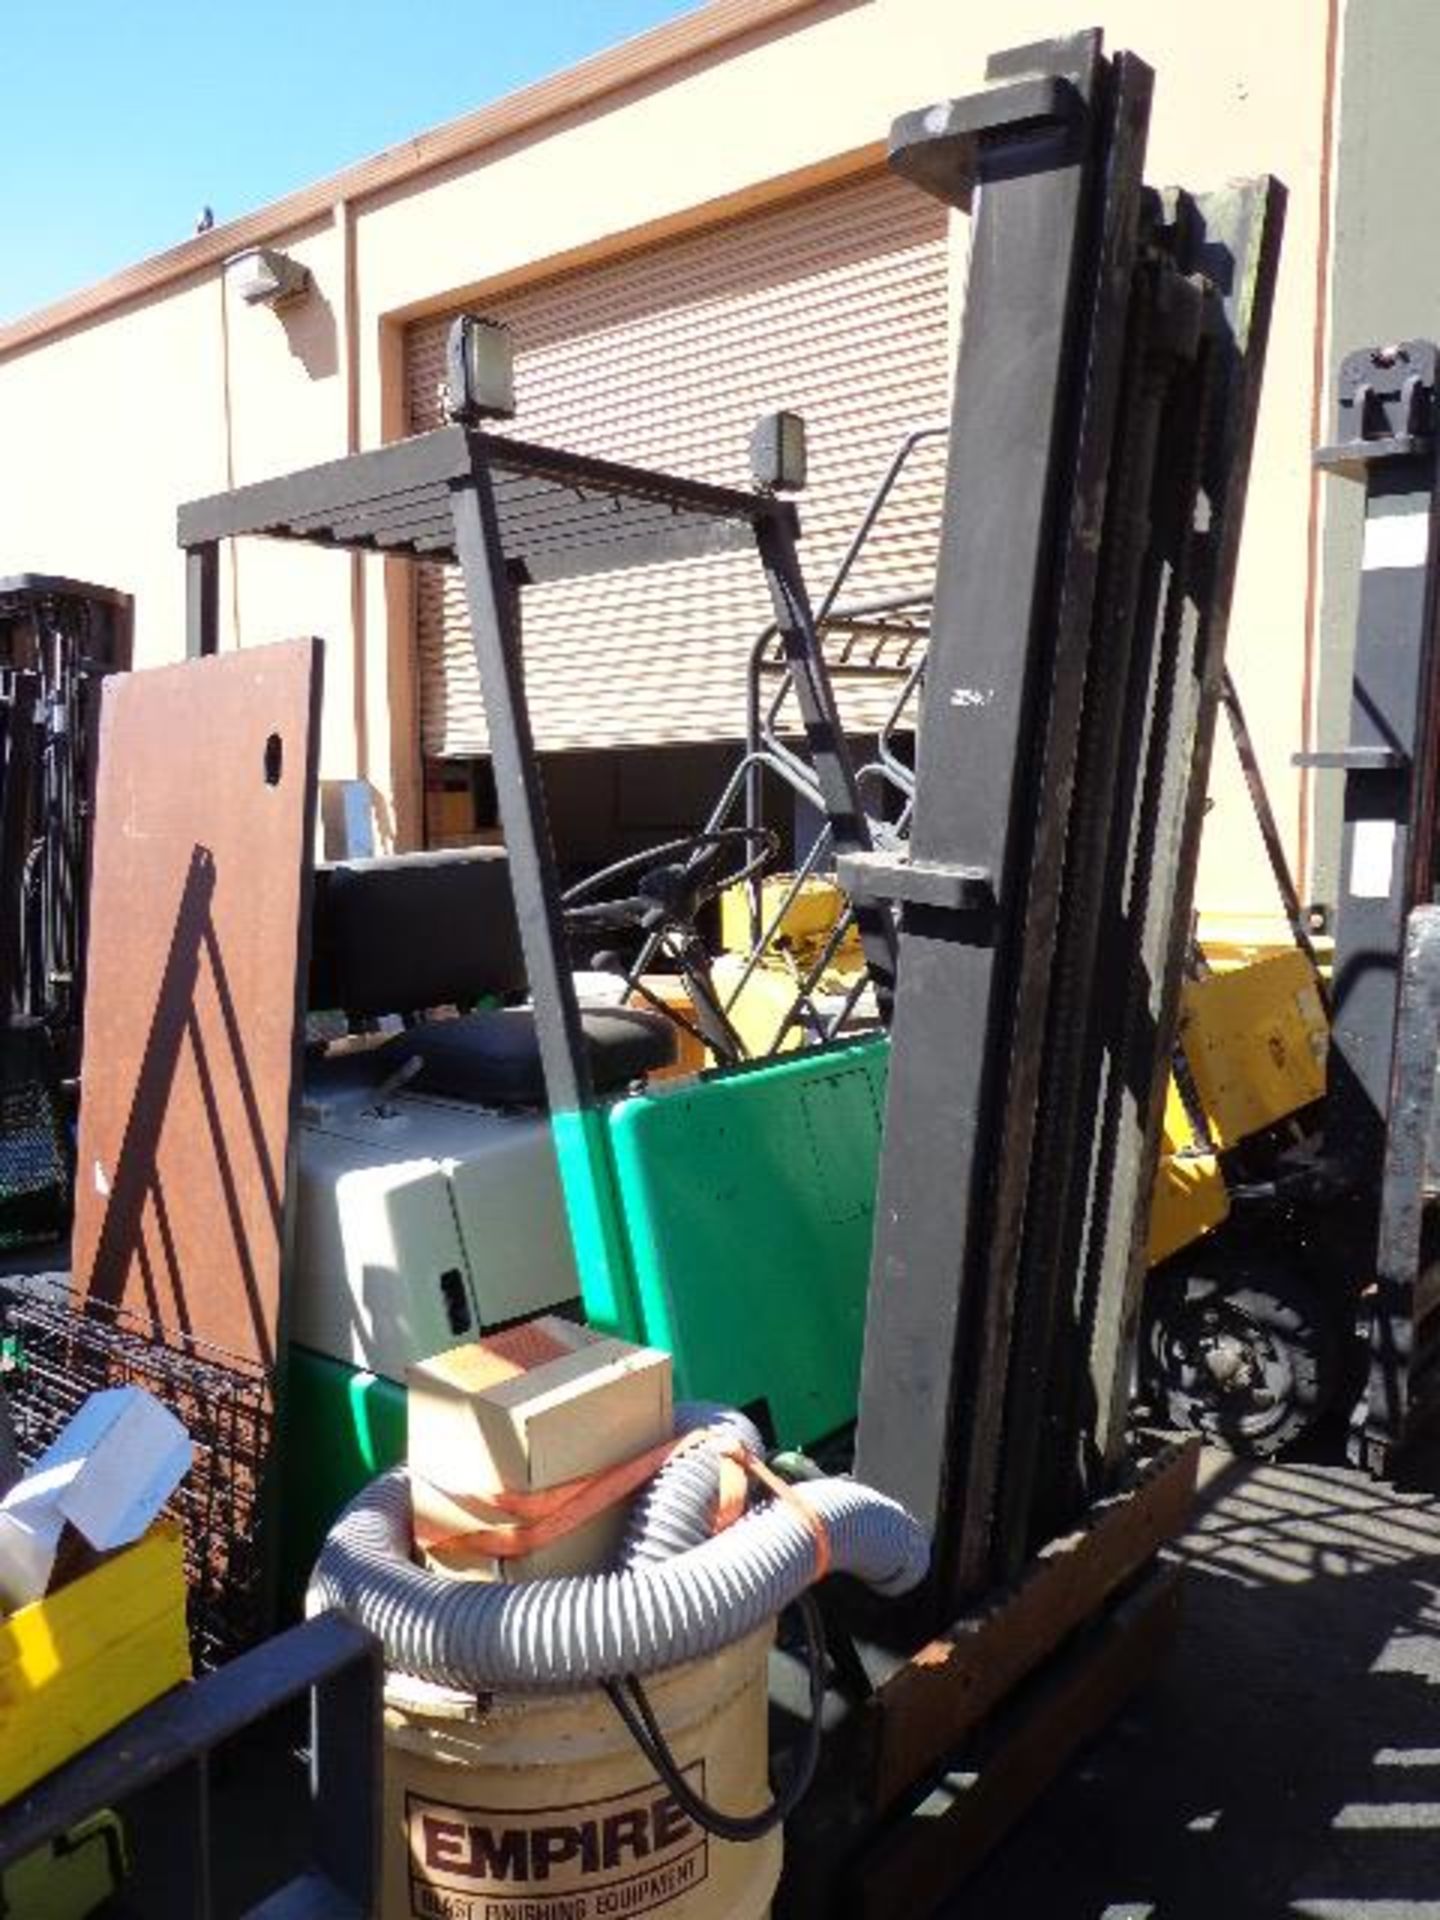 Clark C500-40 4000 Lb Cap LPG Forklift s/n 355-1238-5671FA w/ 2-Stage Mast, Solid Tires SOLD AS-IS